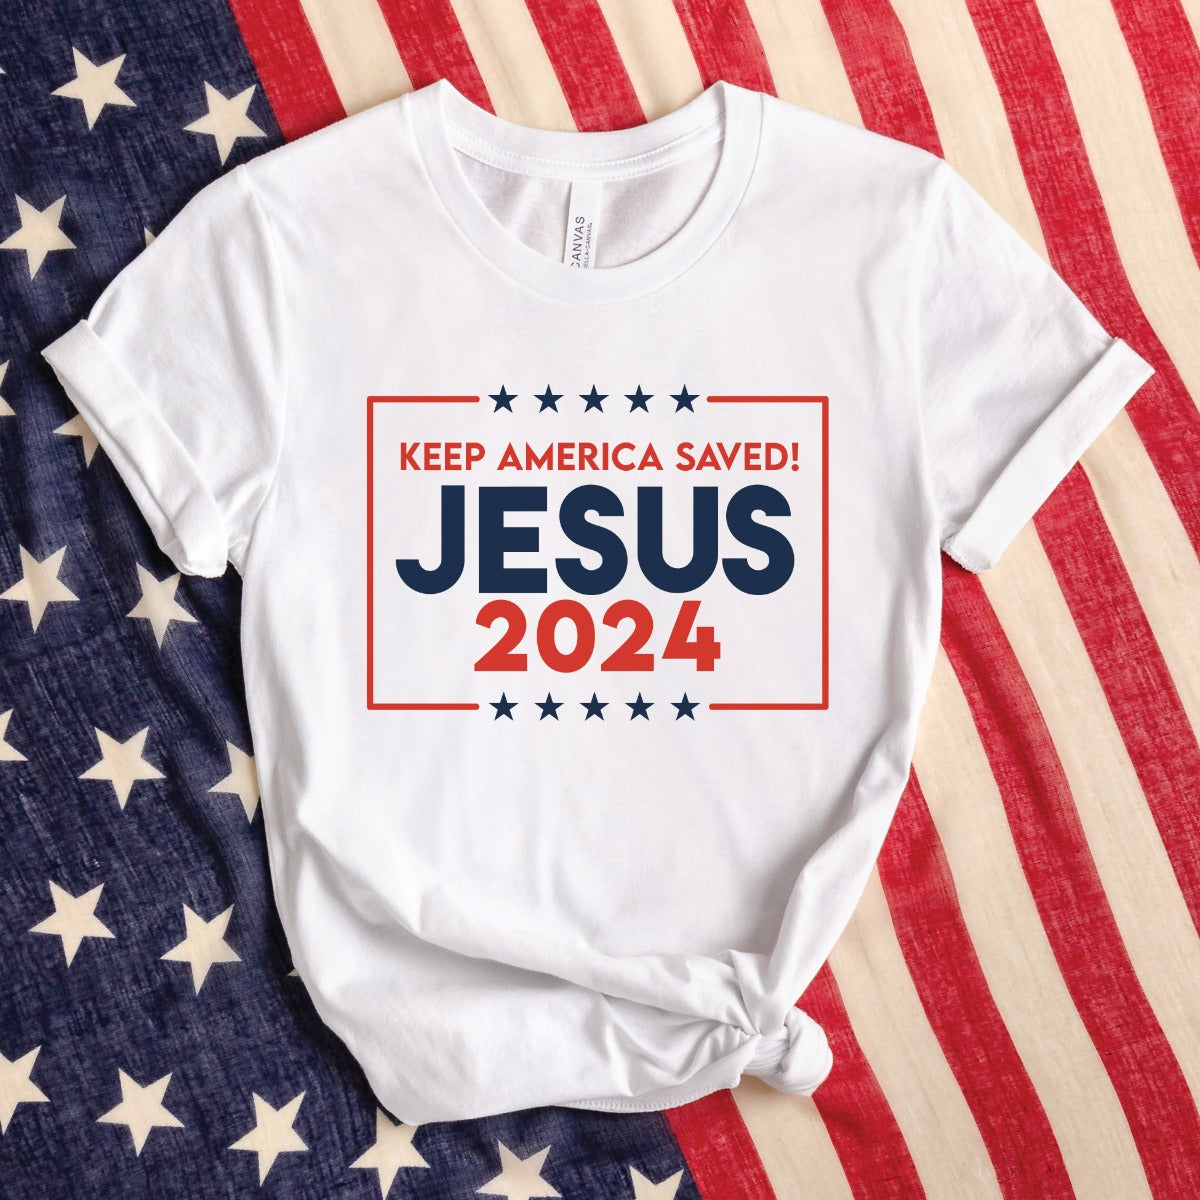 White stars and stripes Presidential election vote unisex Christian t-shirt, Jesus 2024 Keep America Saved" in bold red, white, and blue fonts, made in the USA, made for men and women God & Country Patriots